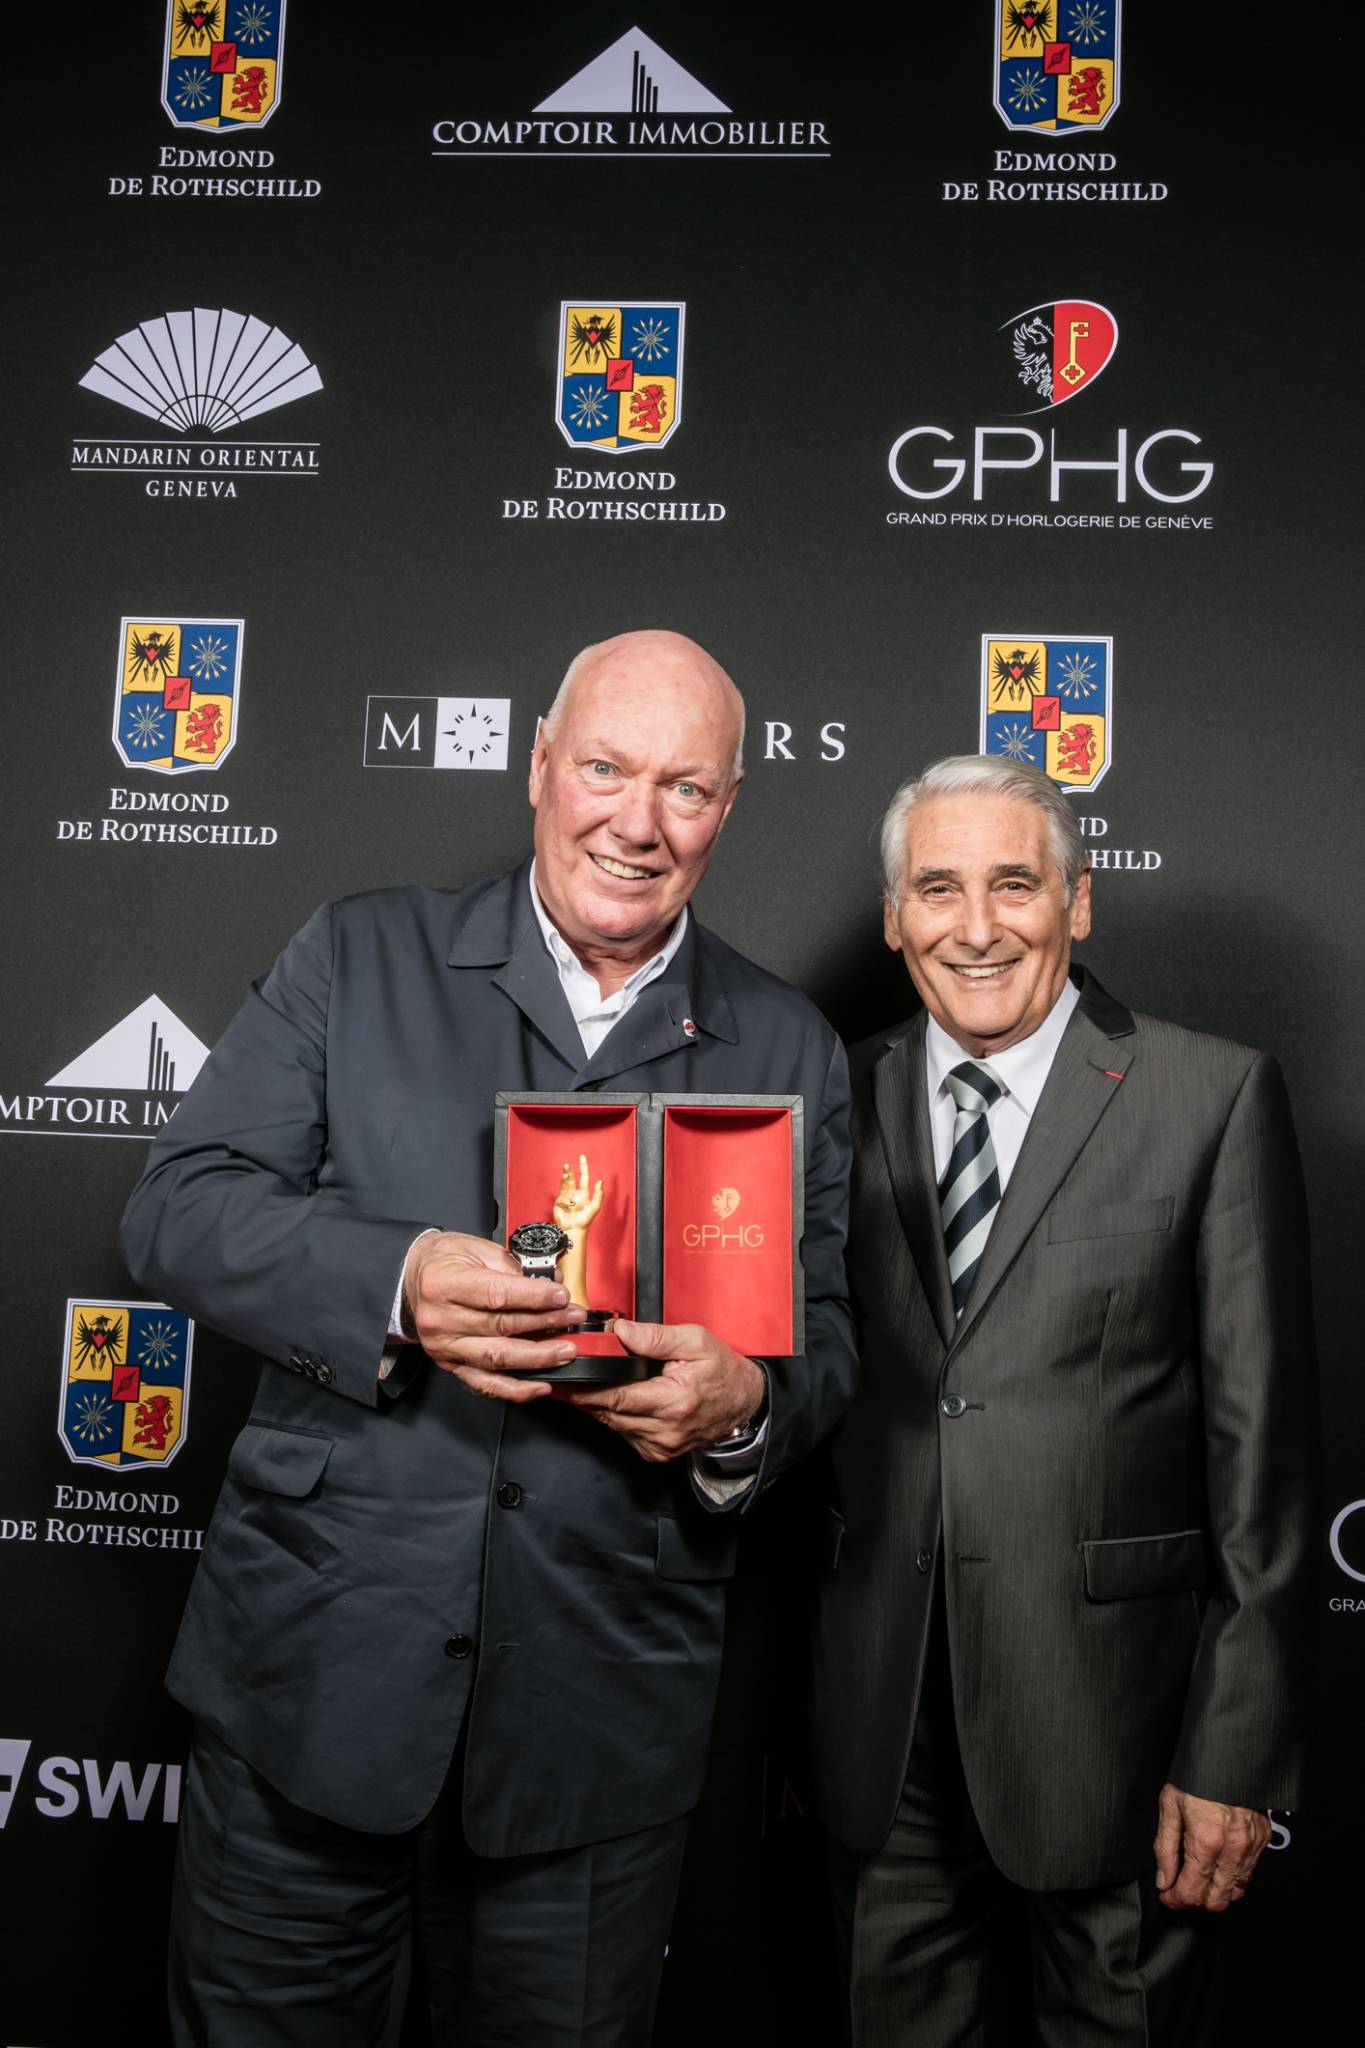 Jean-Claude Biver (President of the Watch Division of the LVMH Group and Chairman of Hublot, winner of the Ladies’ Watch Prize 2015) and Carlo Lamprecht (President of the Foundation of the GPHG)